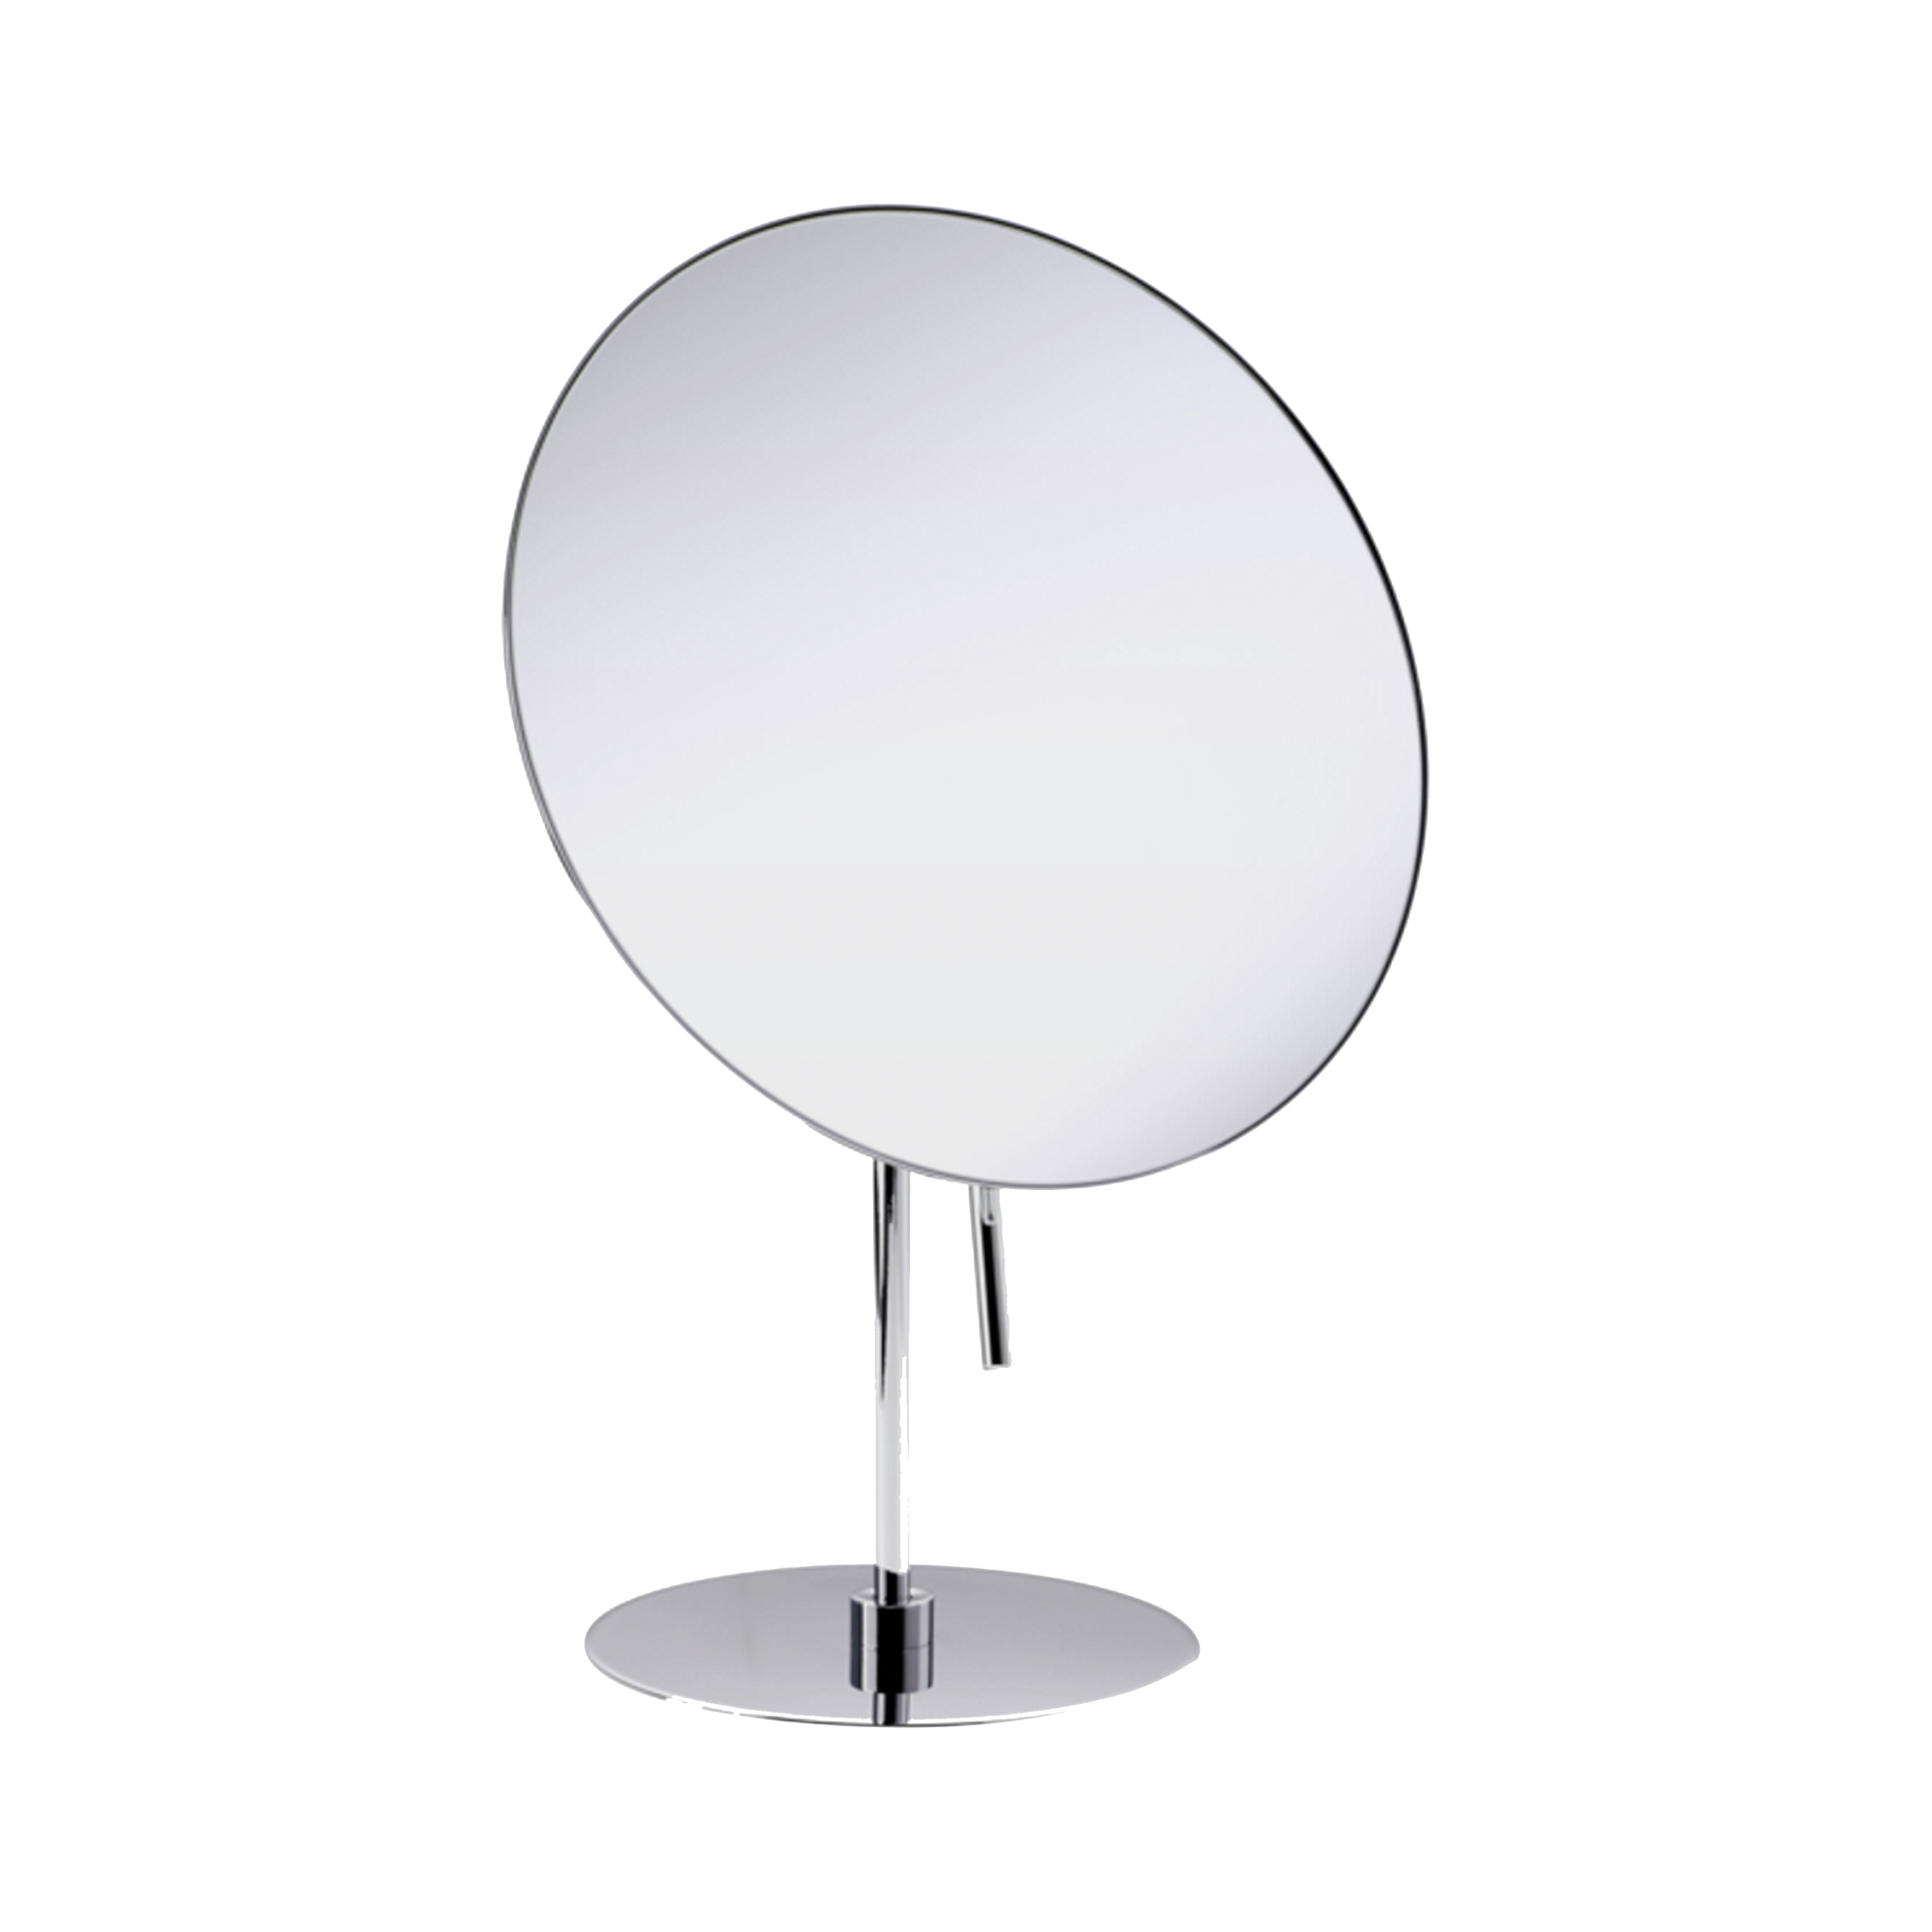 The Pivot Cosmetic Mirror is a pivoting freestanding cosmetic mirror in chrome with 3x magnification.